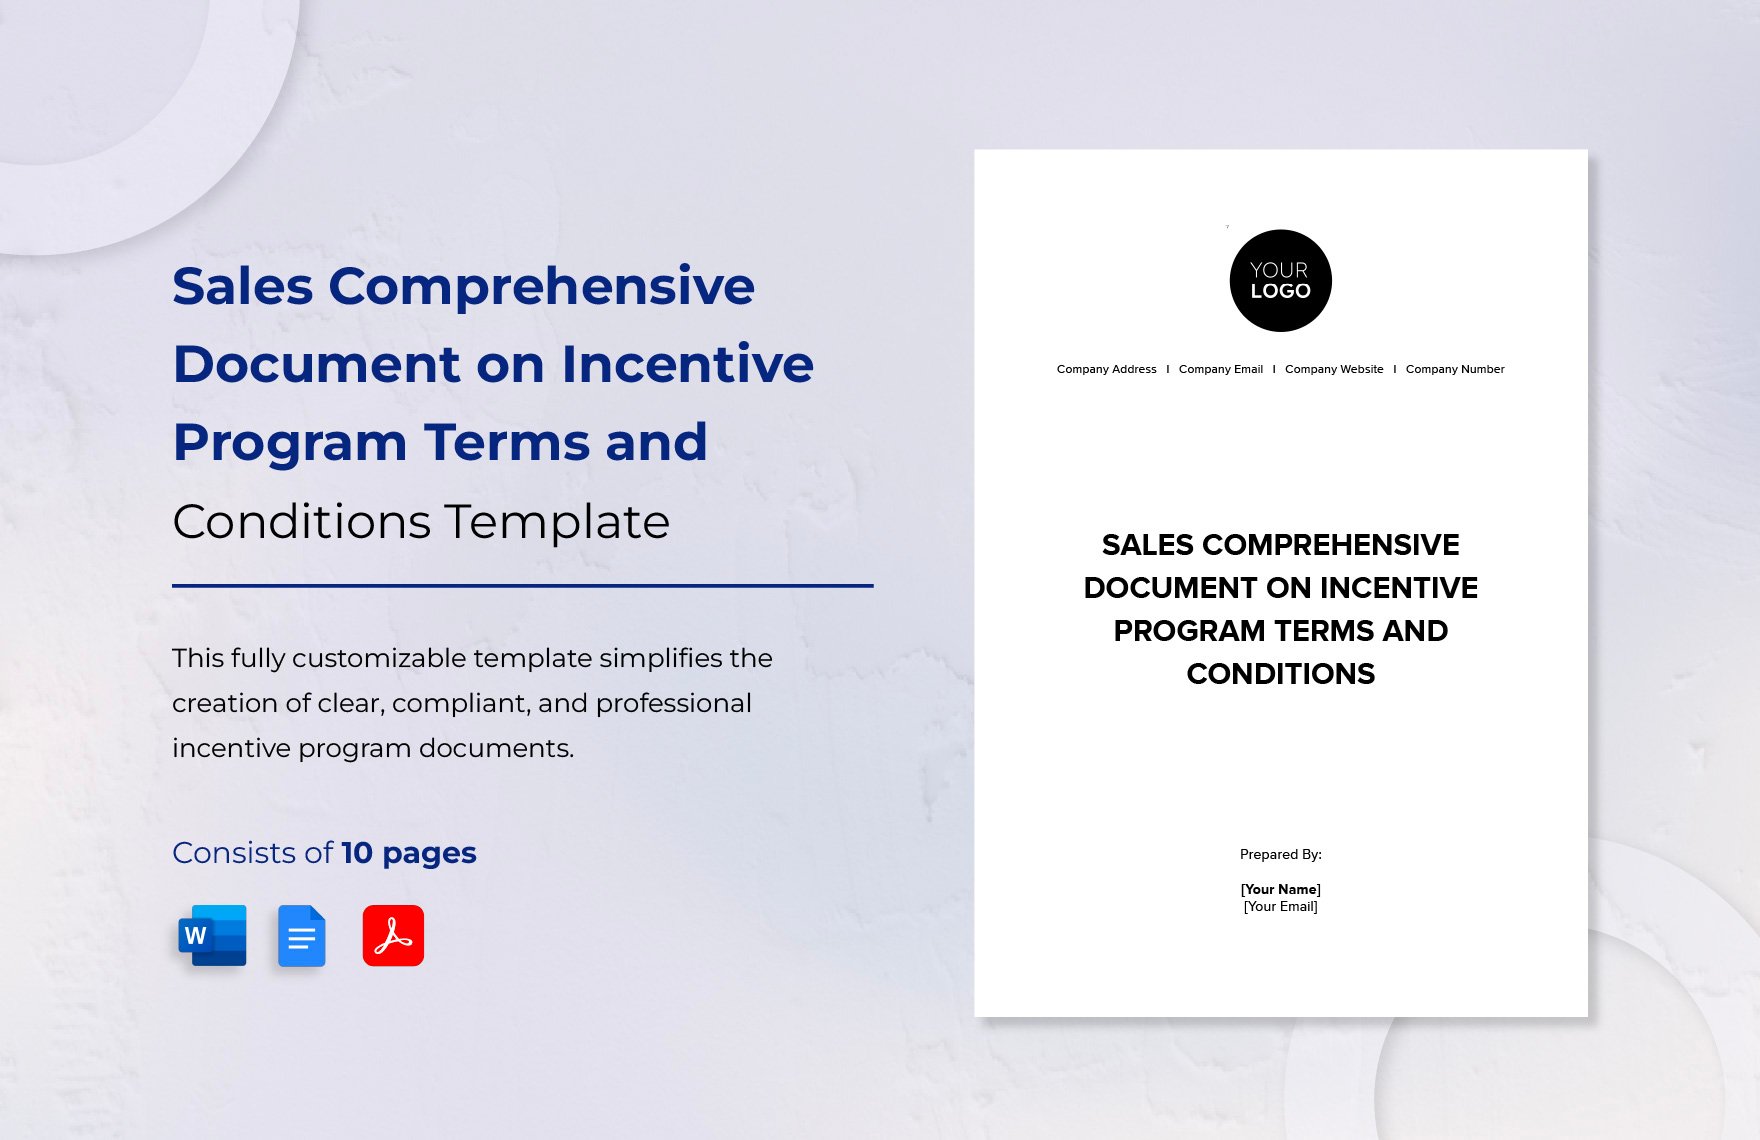 Sales Comprehensive Document on Incentive Program Terms and Conditions Template